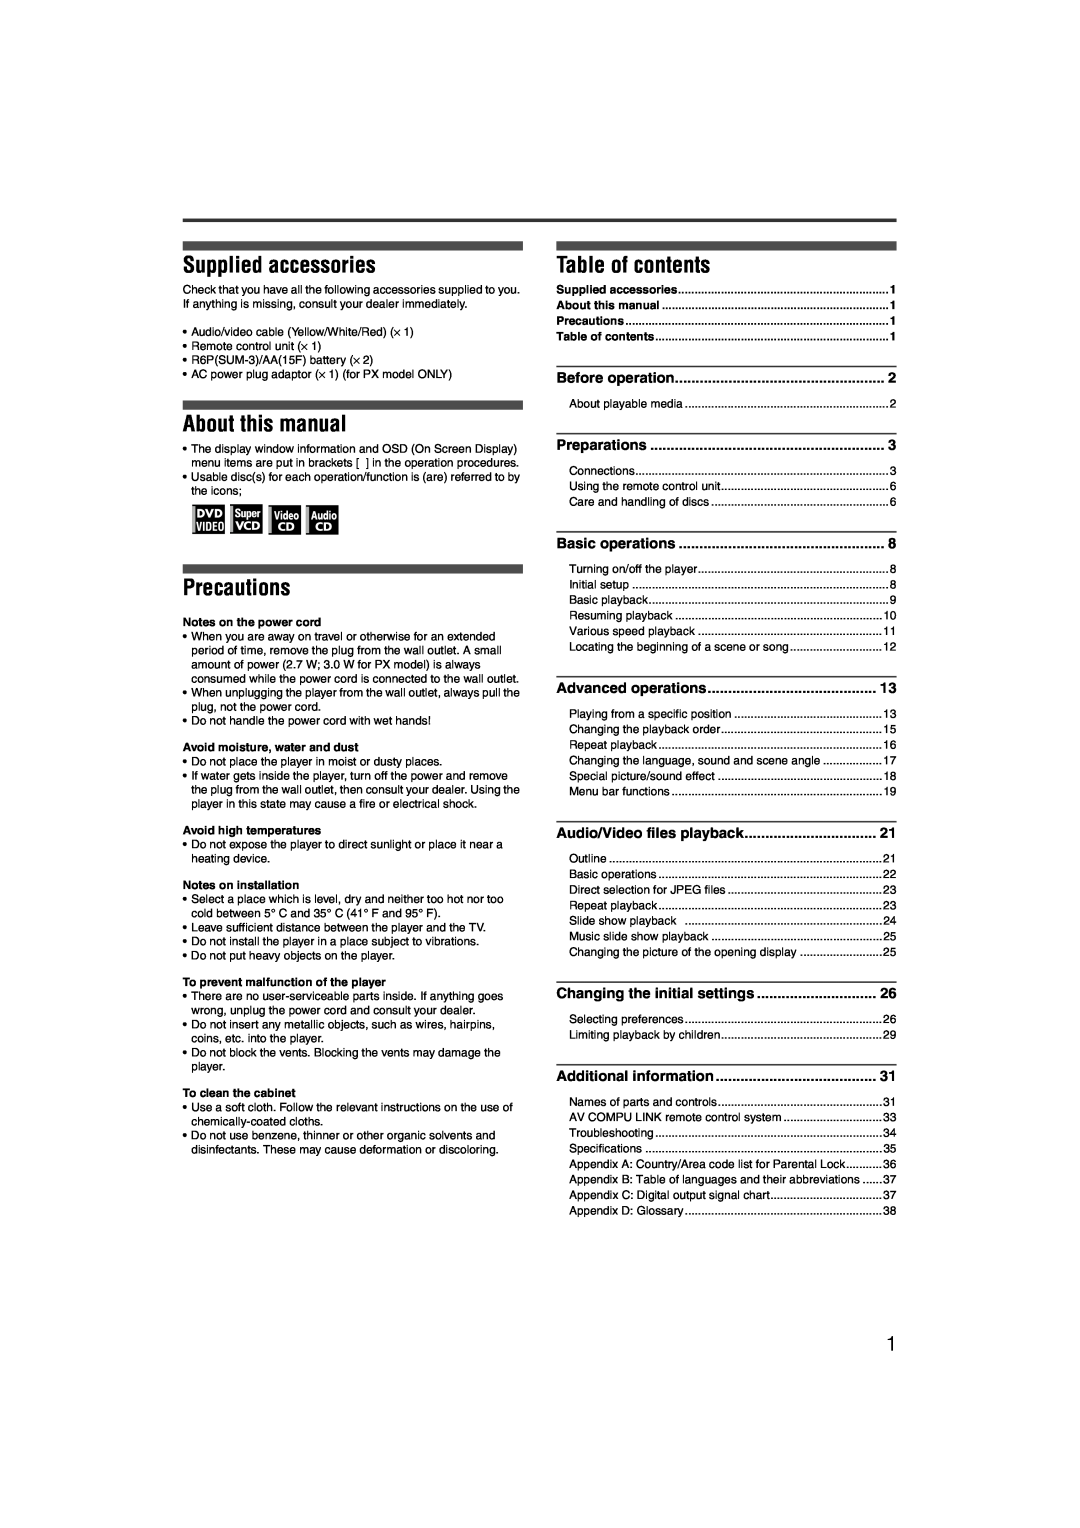 JVC XV-NP1SL Supplied accessories, About this manual, Table of contents, Precautions, Before operation, Preparations 